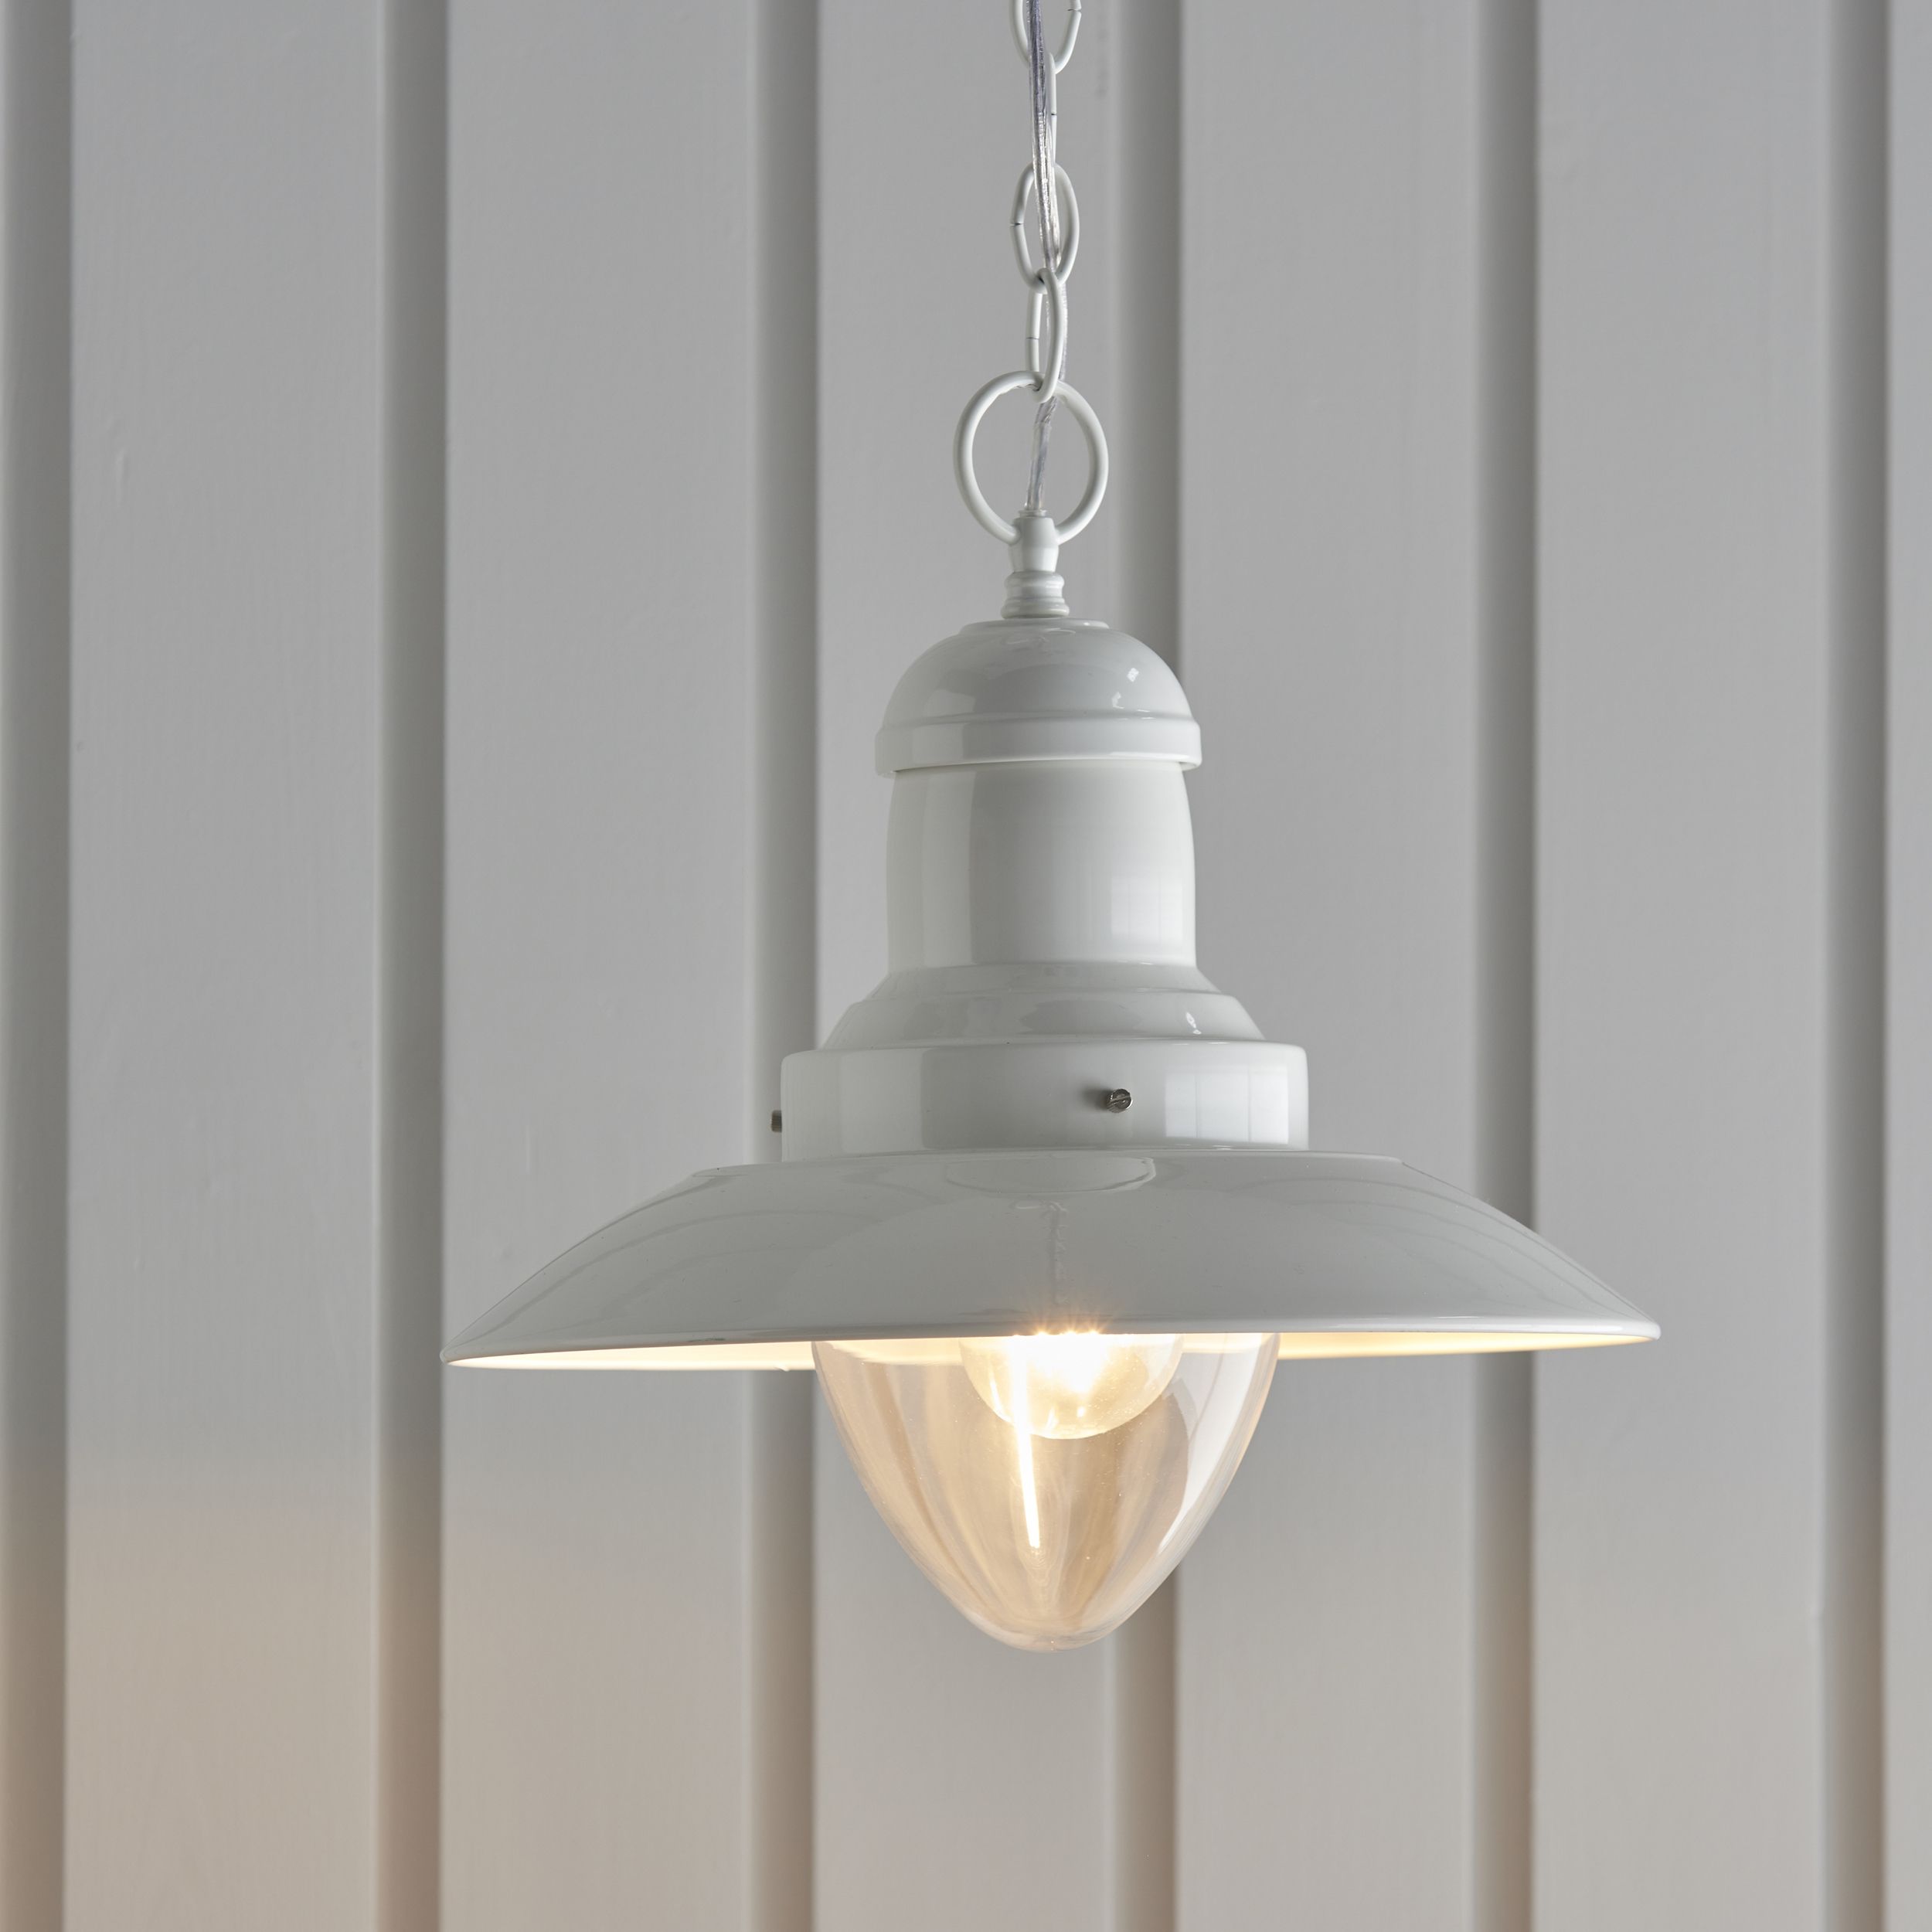 Current Pendant Light – Finished In Gloss Cream & Clear Glass Pertaining To Gloss Cream Lantern Chandeliers (View 7 of 10)